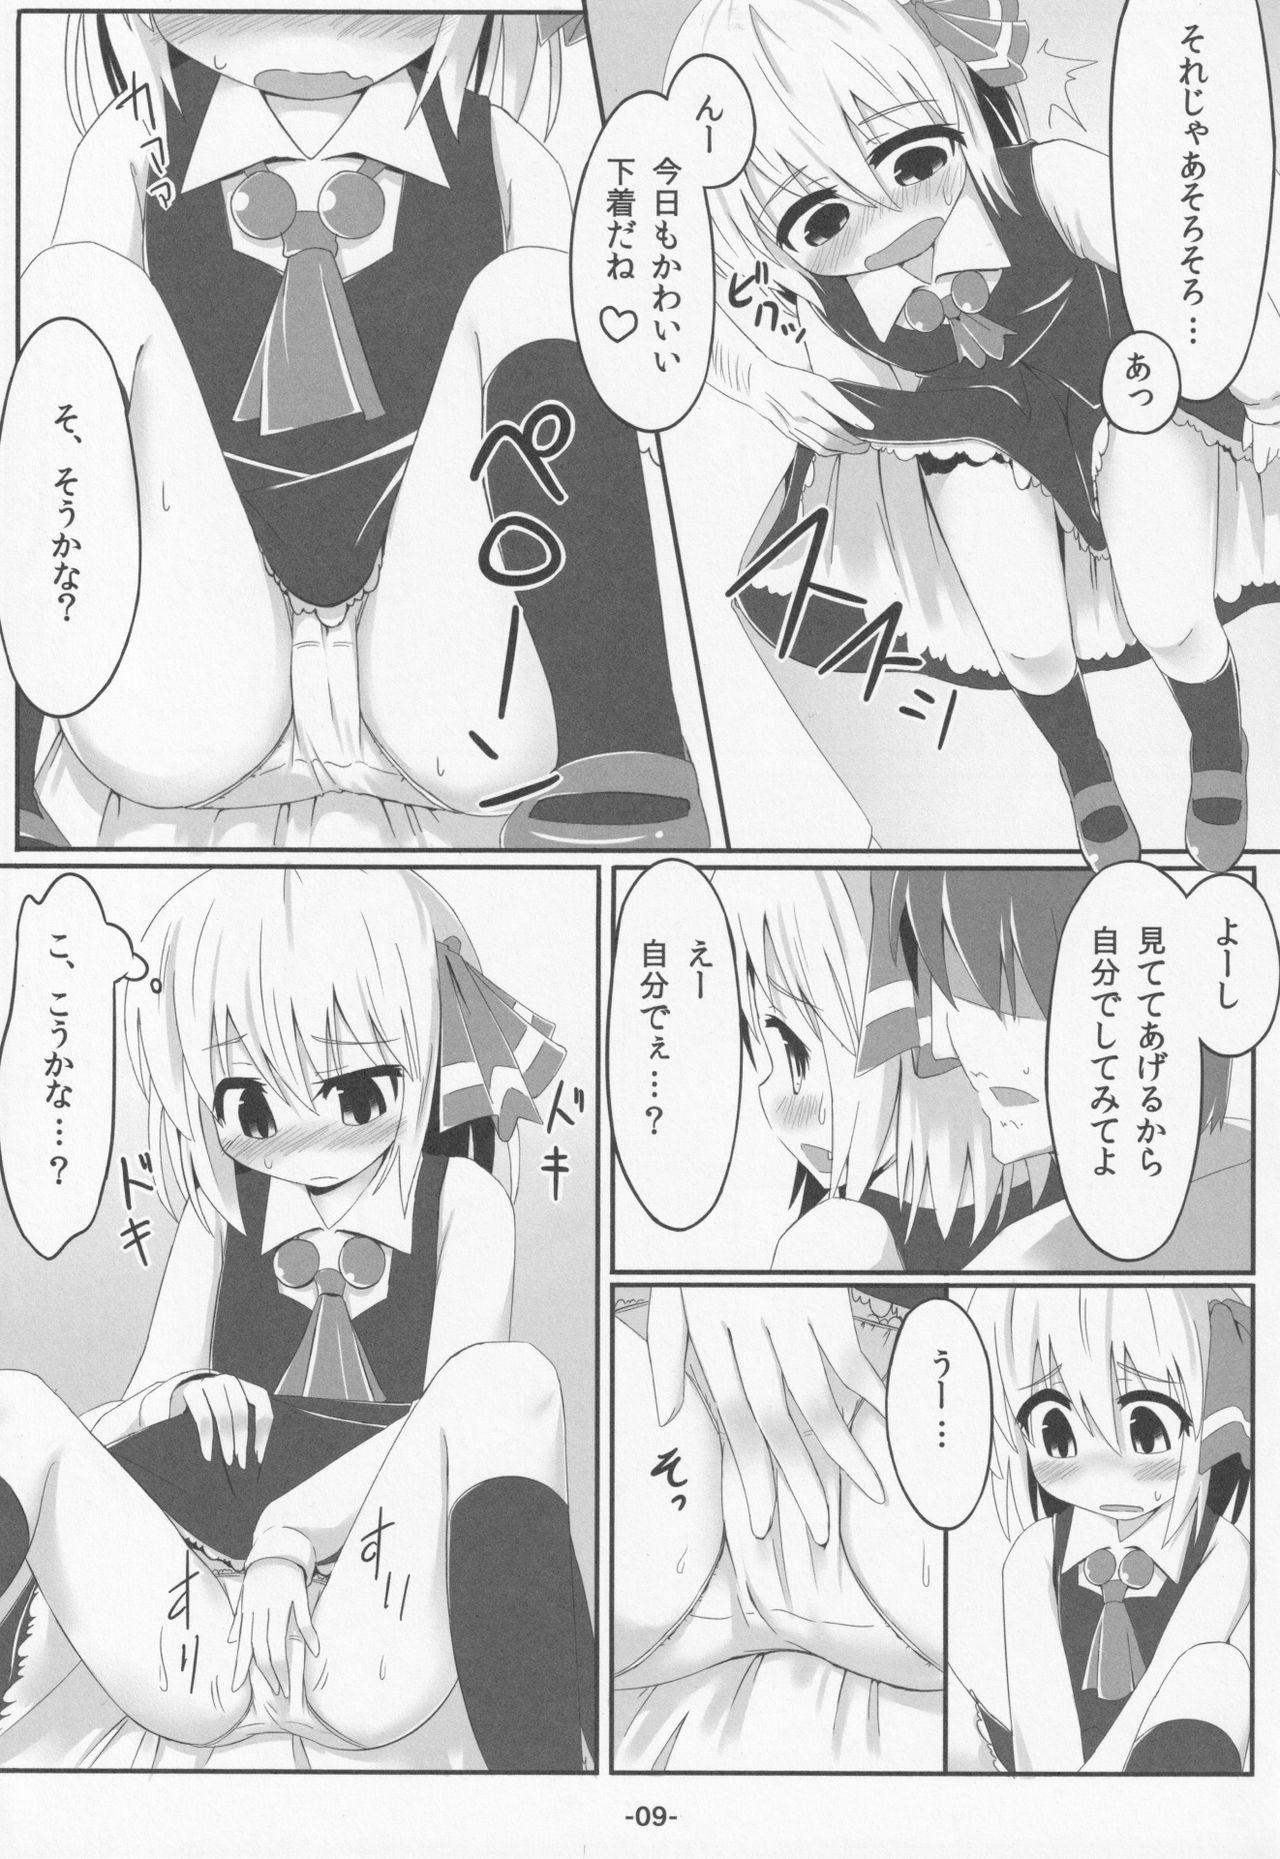 Twerking blind new days - Touhou project Extreme - Page 8